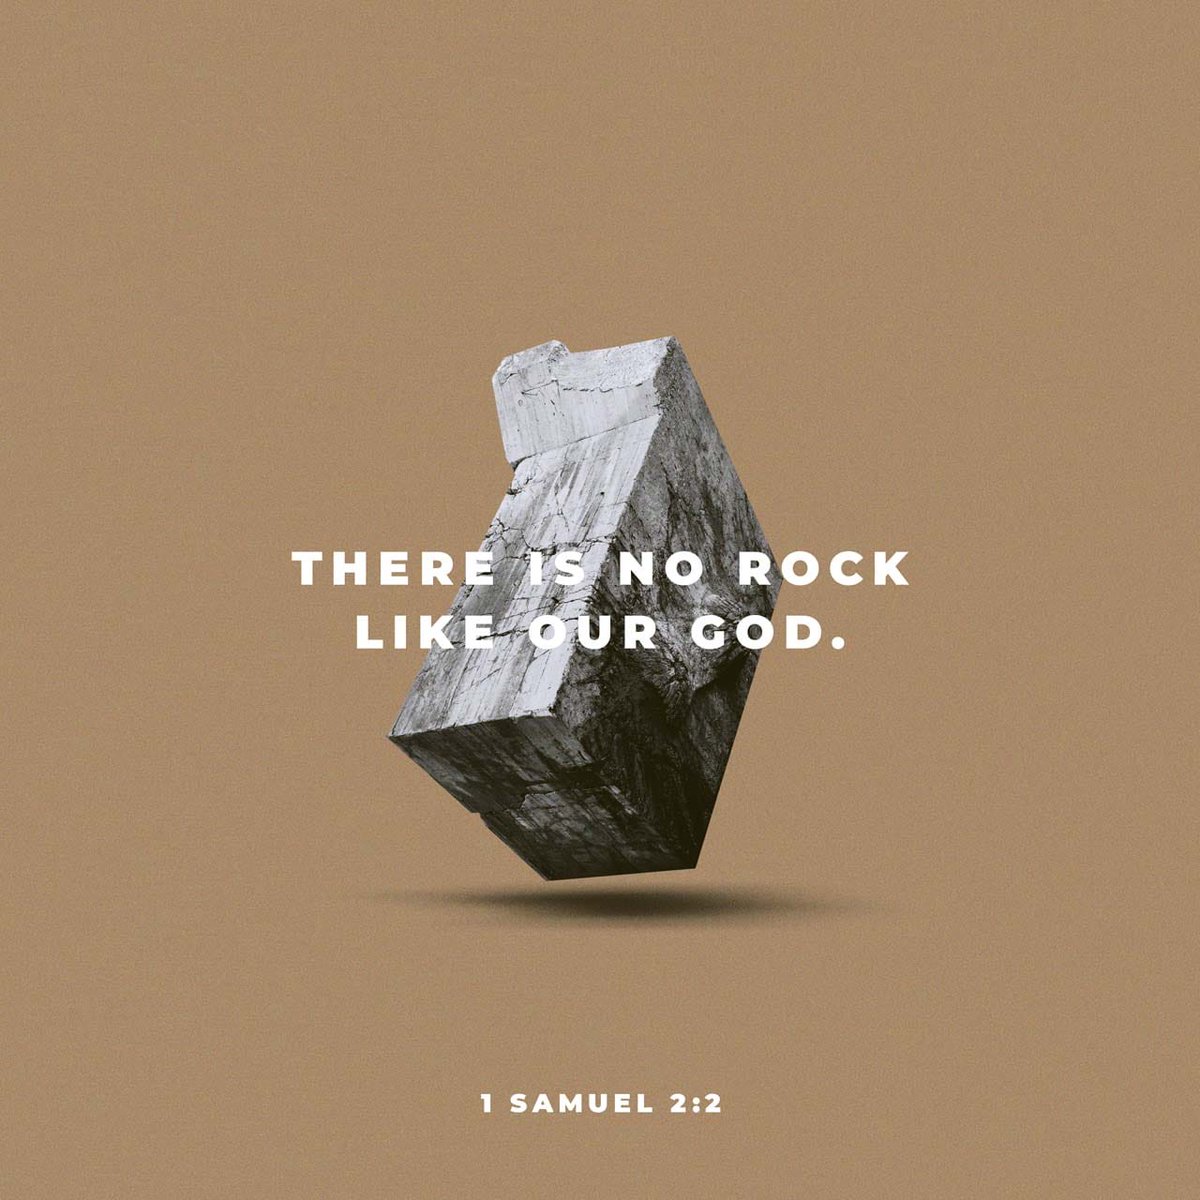 1 Samuel 2:2 NASB There is no one holy like the Lord, Indeed, there is no one besides You, Nor is there any rock like our God. #dailybread #dailyverse #scripture #bibleverse #bible #jesus